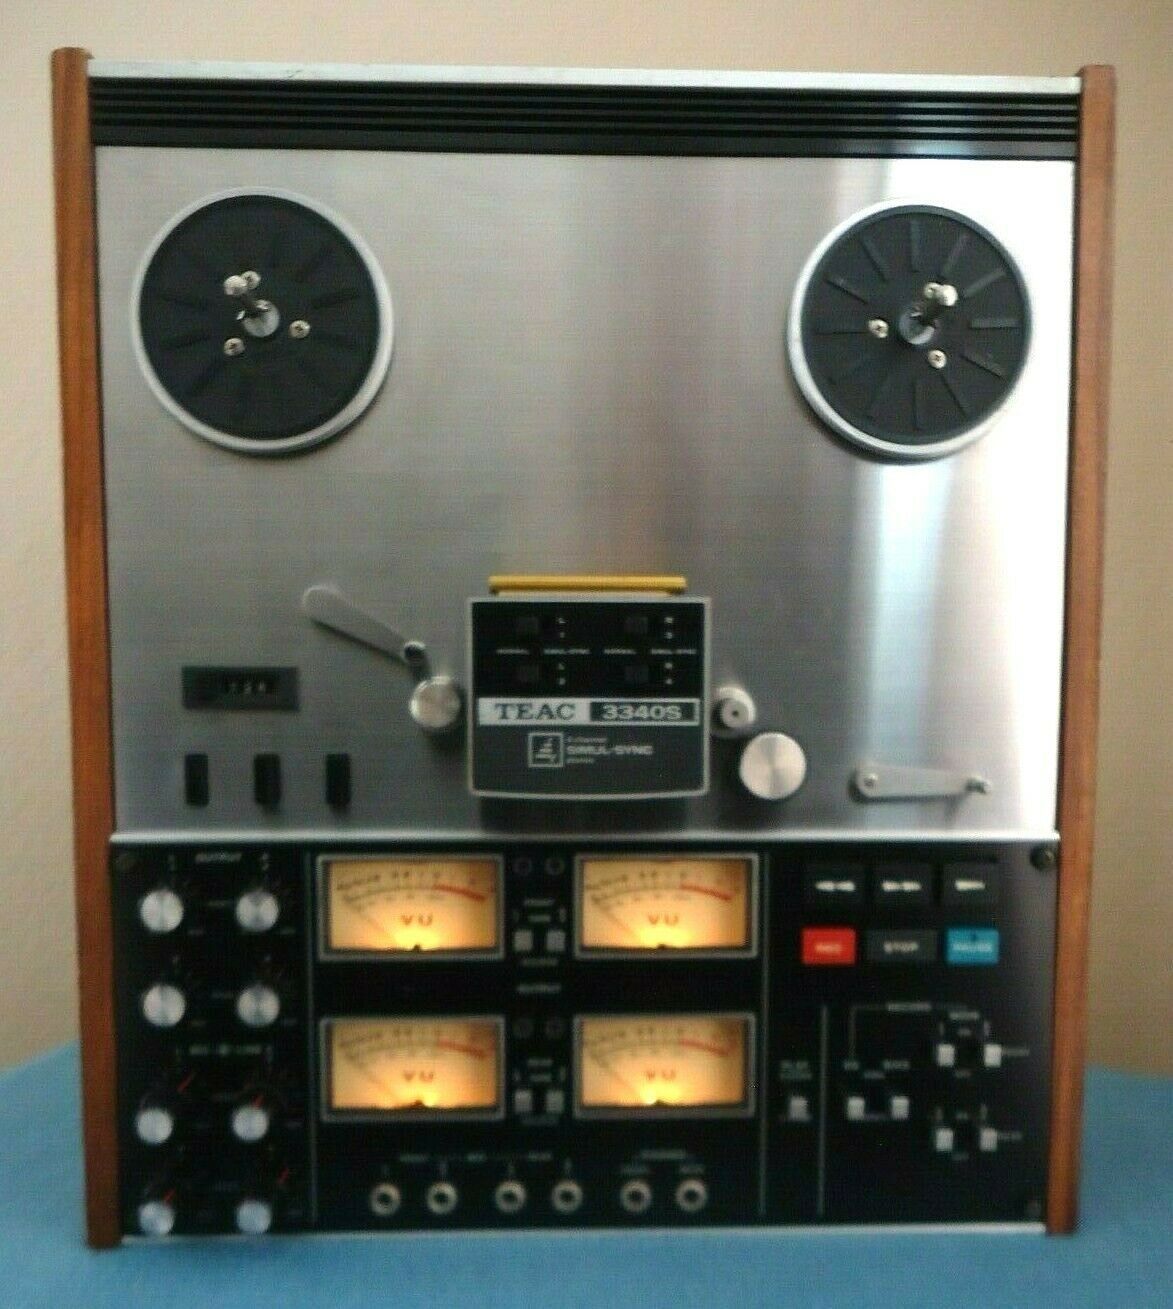 Teac 3340S Reel to Reel Tape Recorder, See and 50 similar items